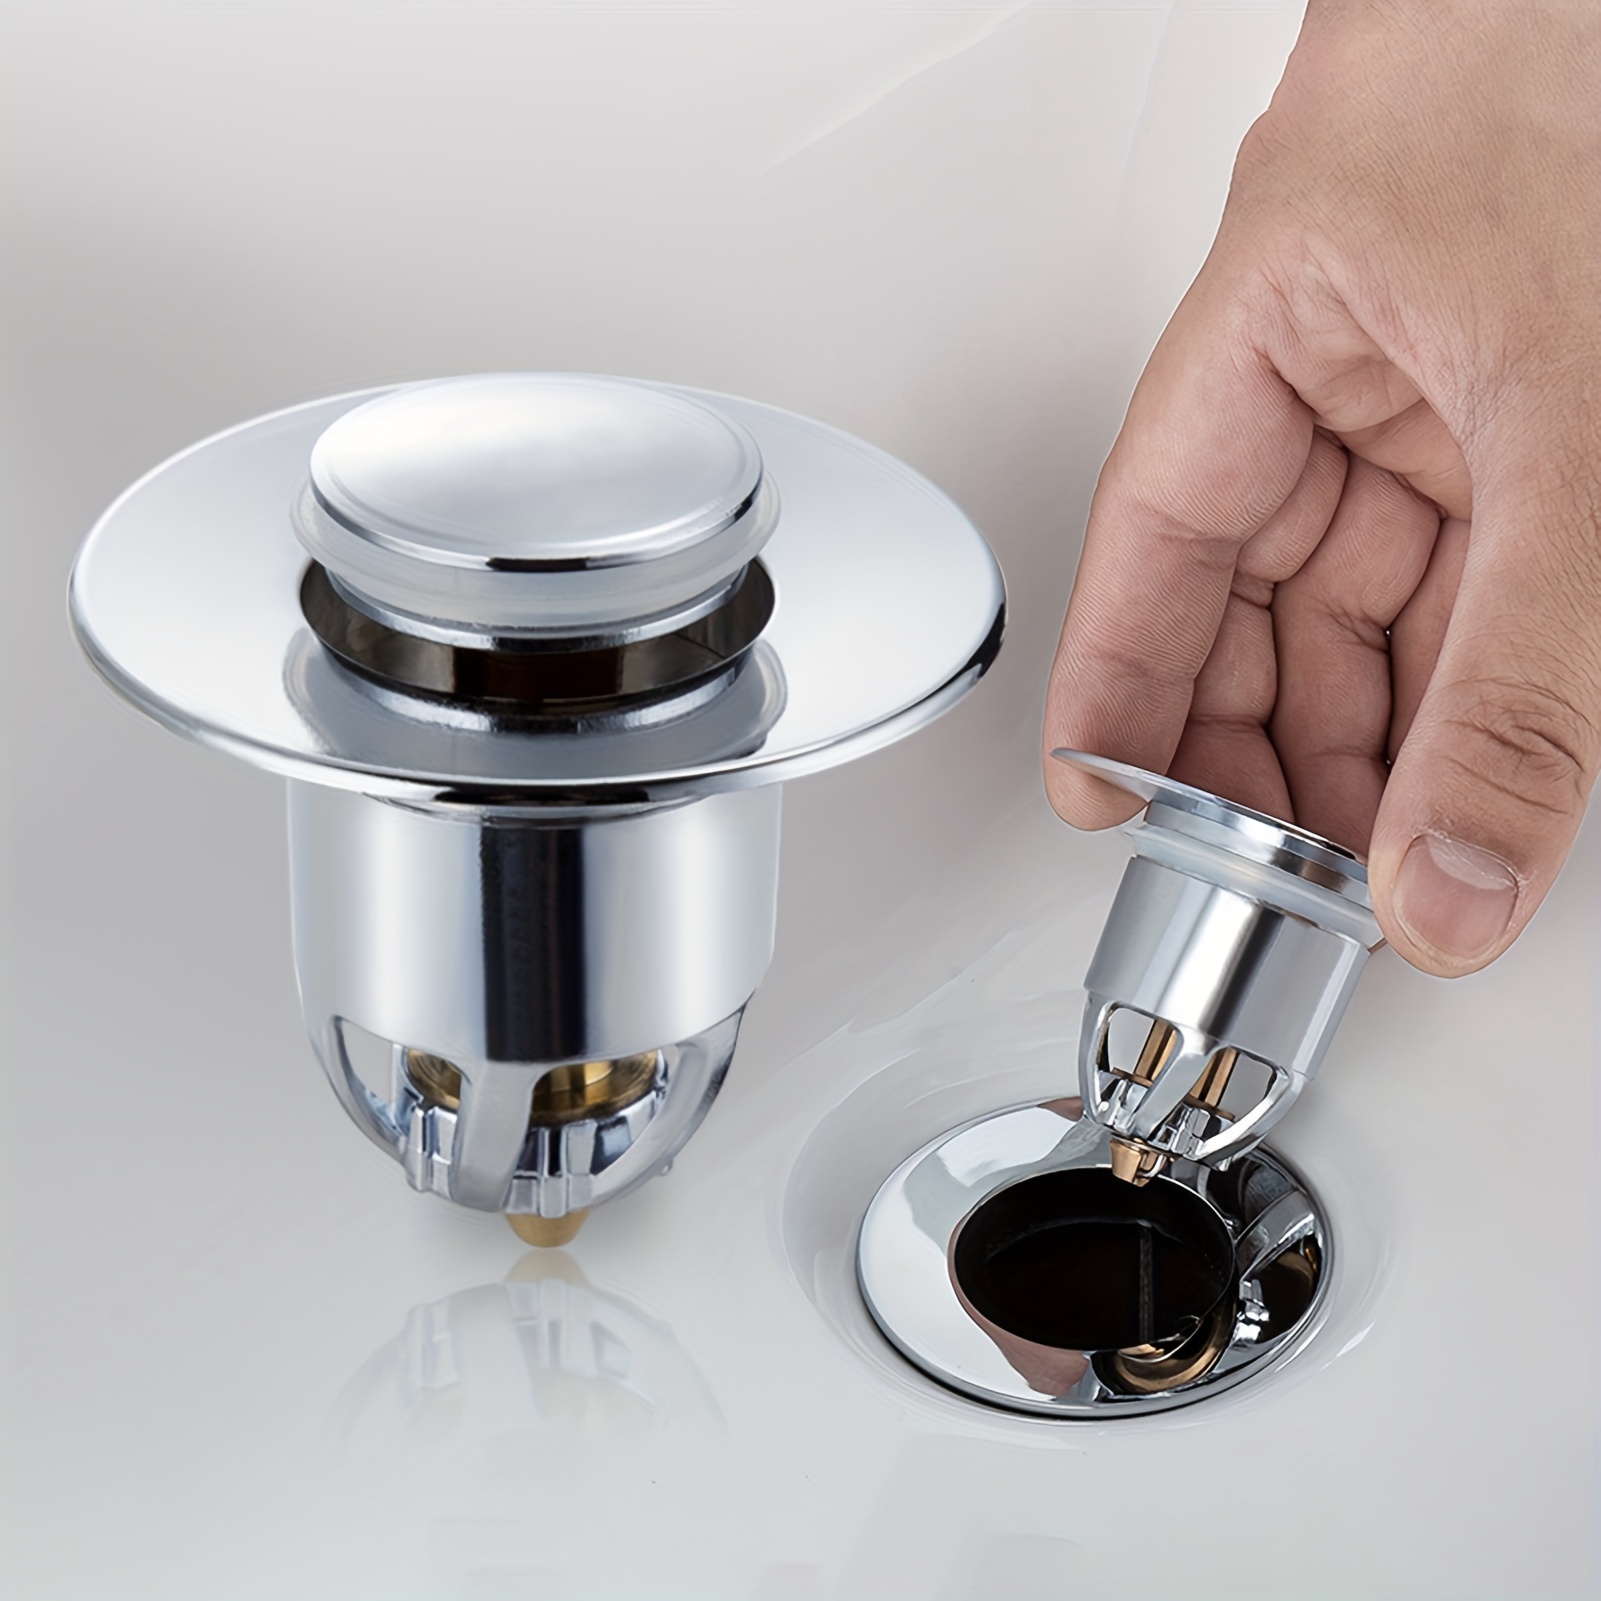 

Universal Bathroom Sink Stopper Fits 1.06-1.5 Inch Premium Basin Pop Up Sink Drain Strainer Anti-leakage And Clogging With Hair Catcher Made Brass Chrome Plated